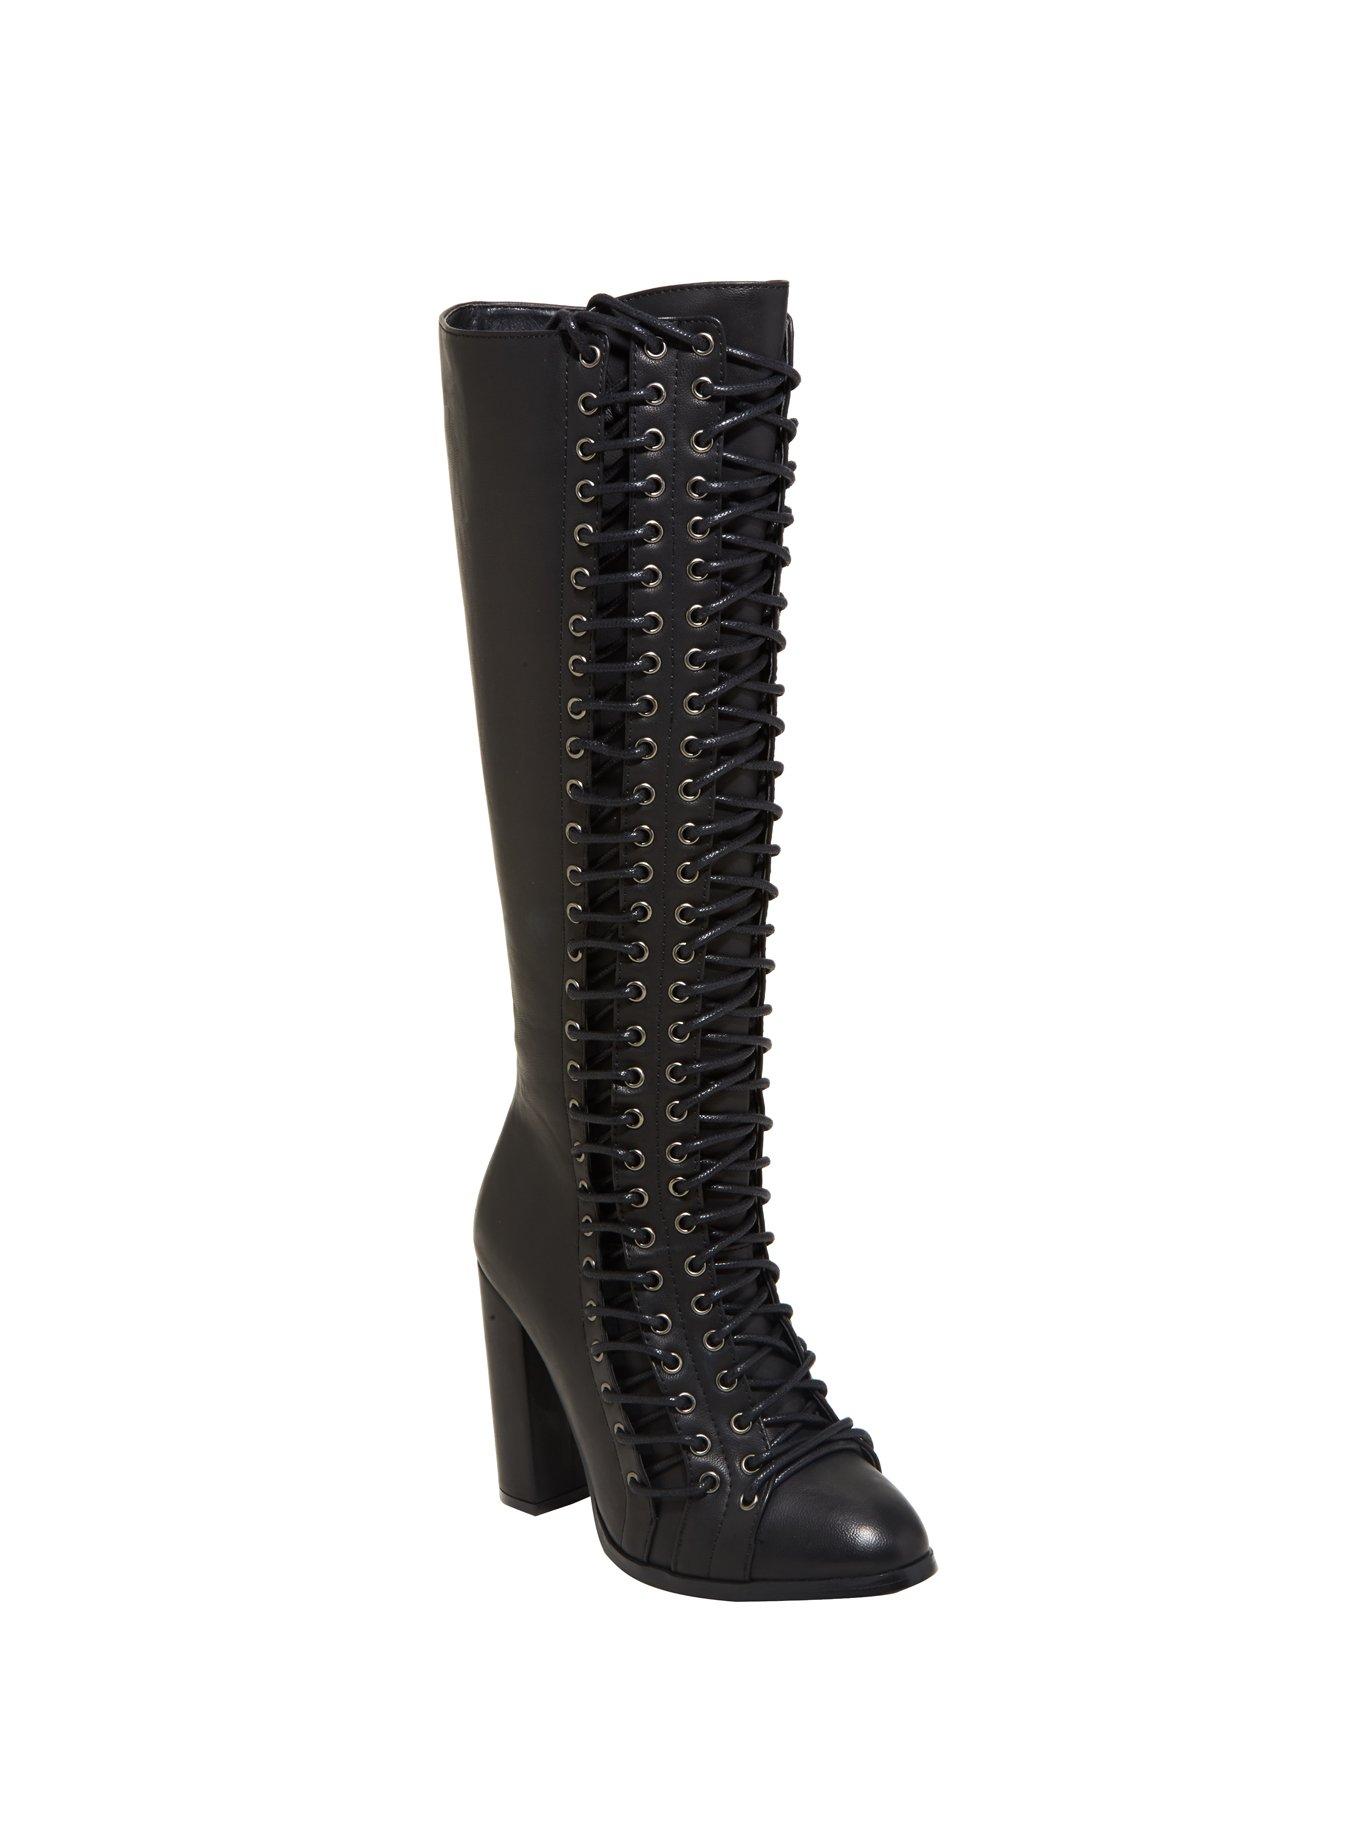 Triple Lace-Up Over-The-Knee Boots, BLACK, hi-res